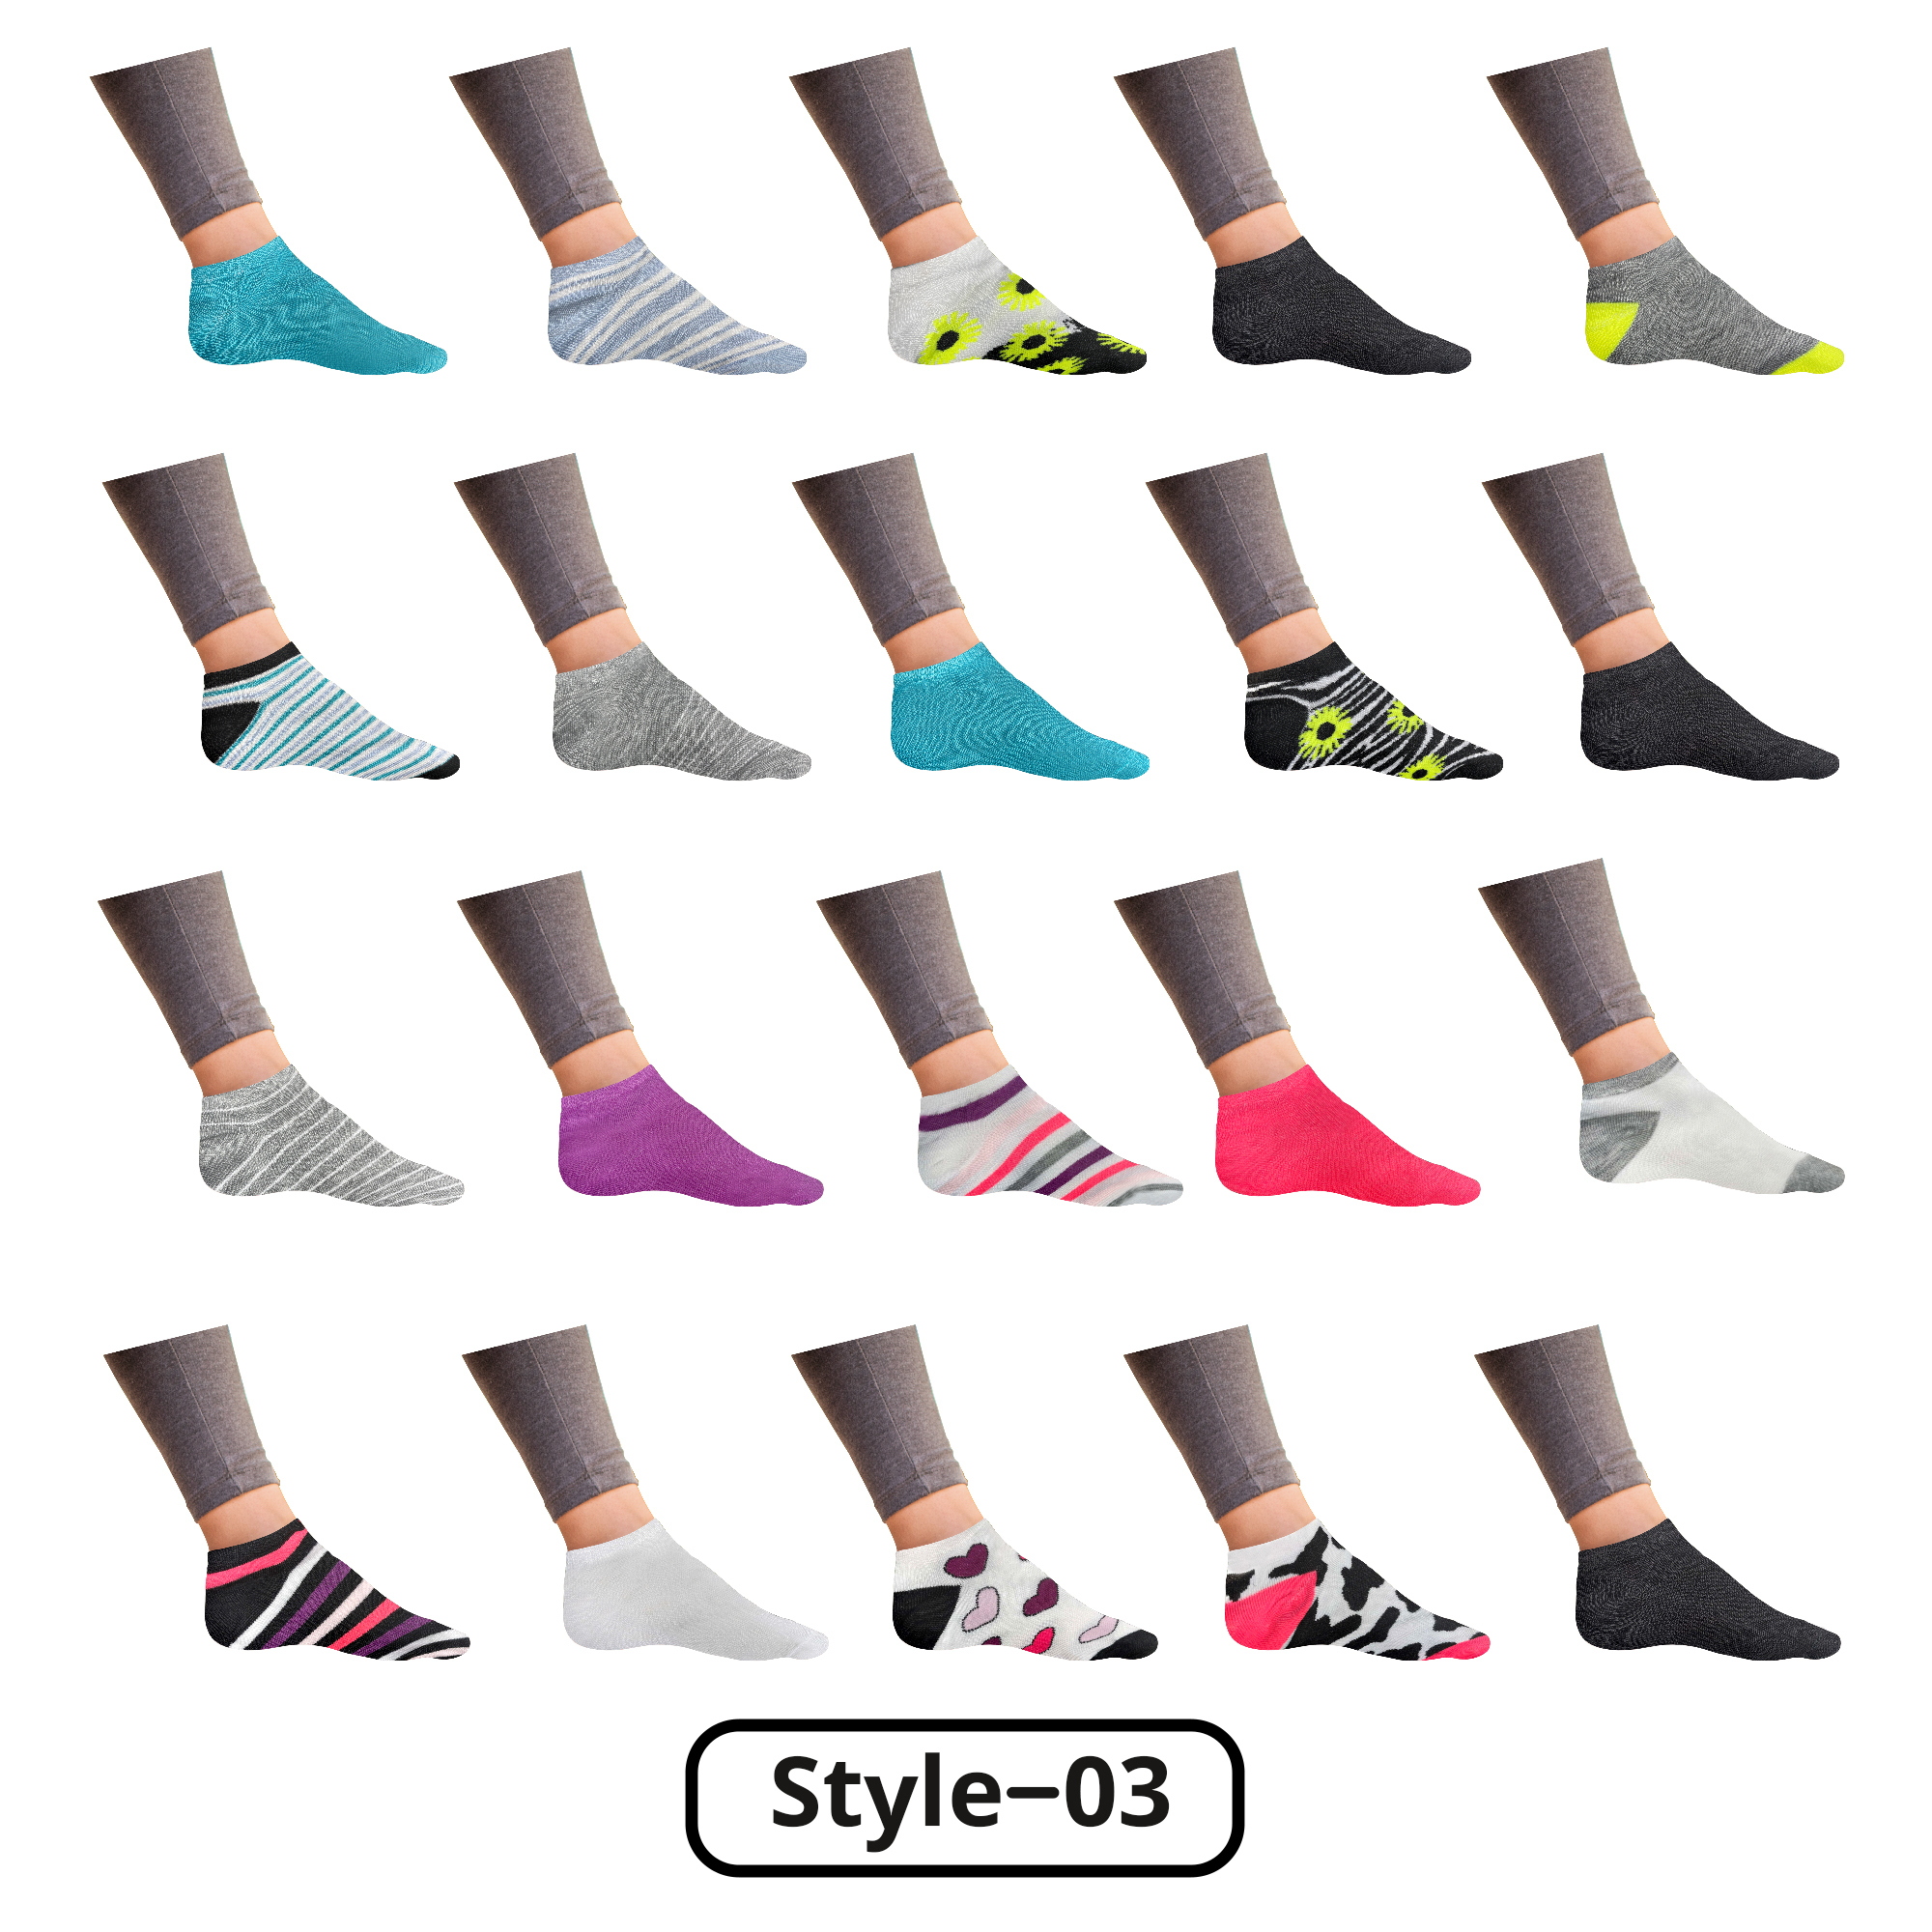 20-Pairs: Women’s Breathable Stylish Colorful Fun No Show Low Cut Ankle Socks - Style 2